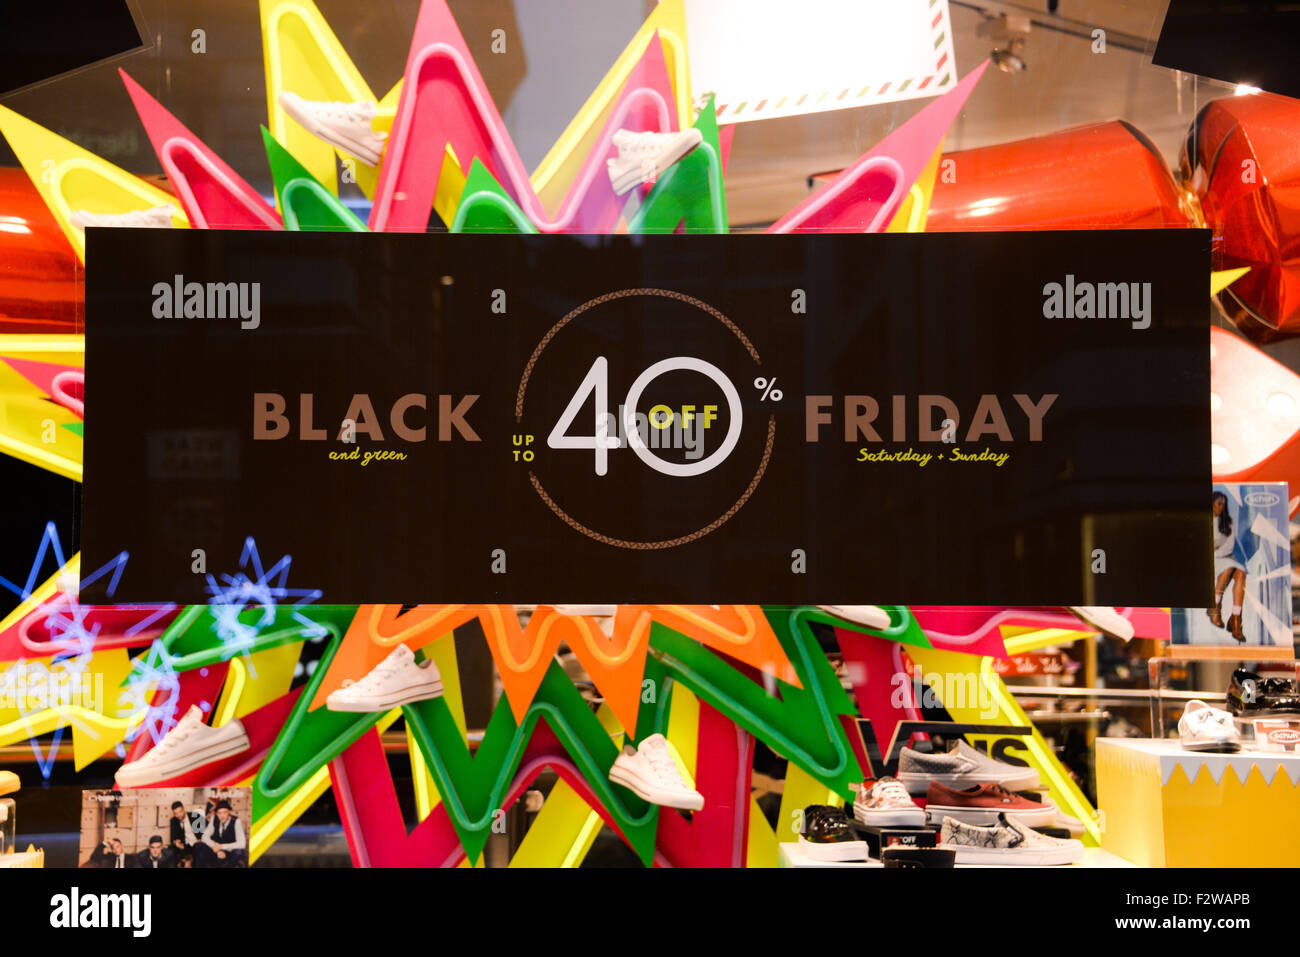 Black Friday signs in shop windows in Oxford St, London uk Stock Photo